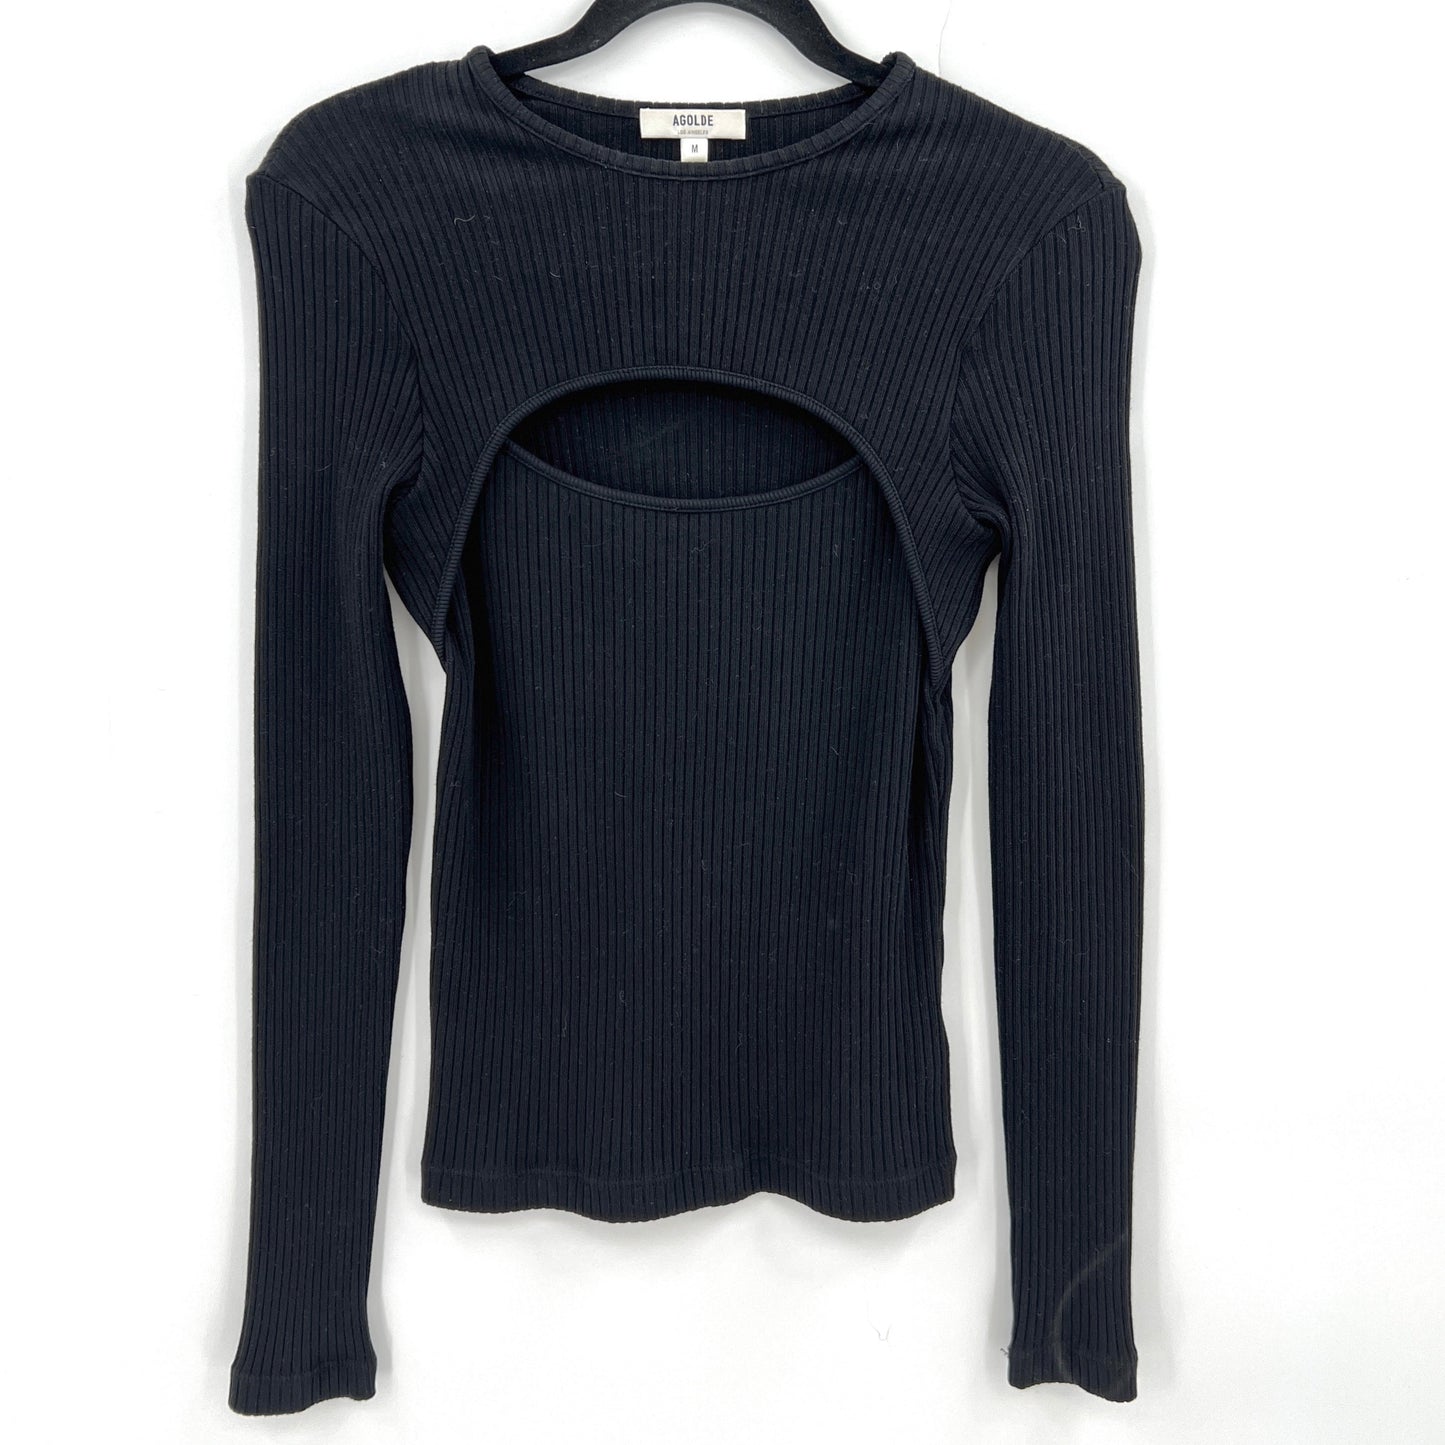 SOLD. Agolde Lyza Cut Out Long Sleeve Top M